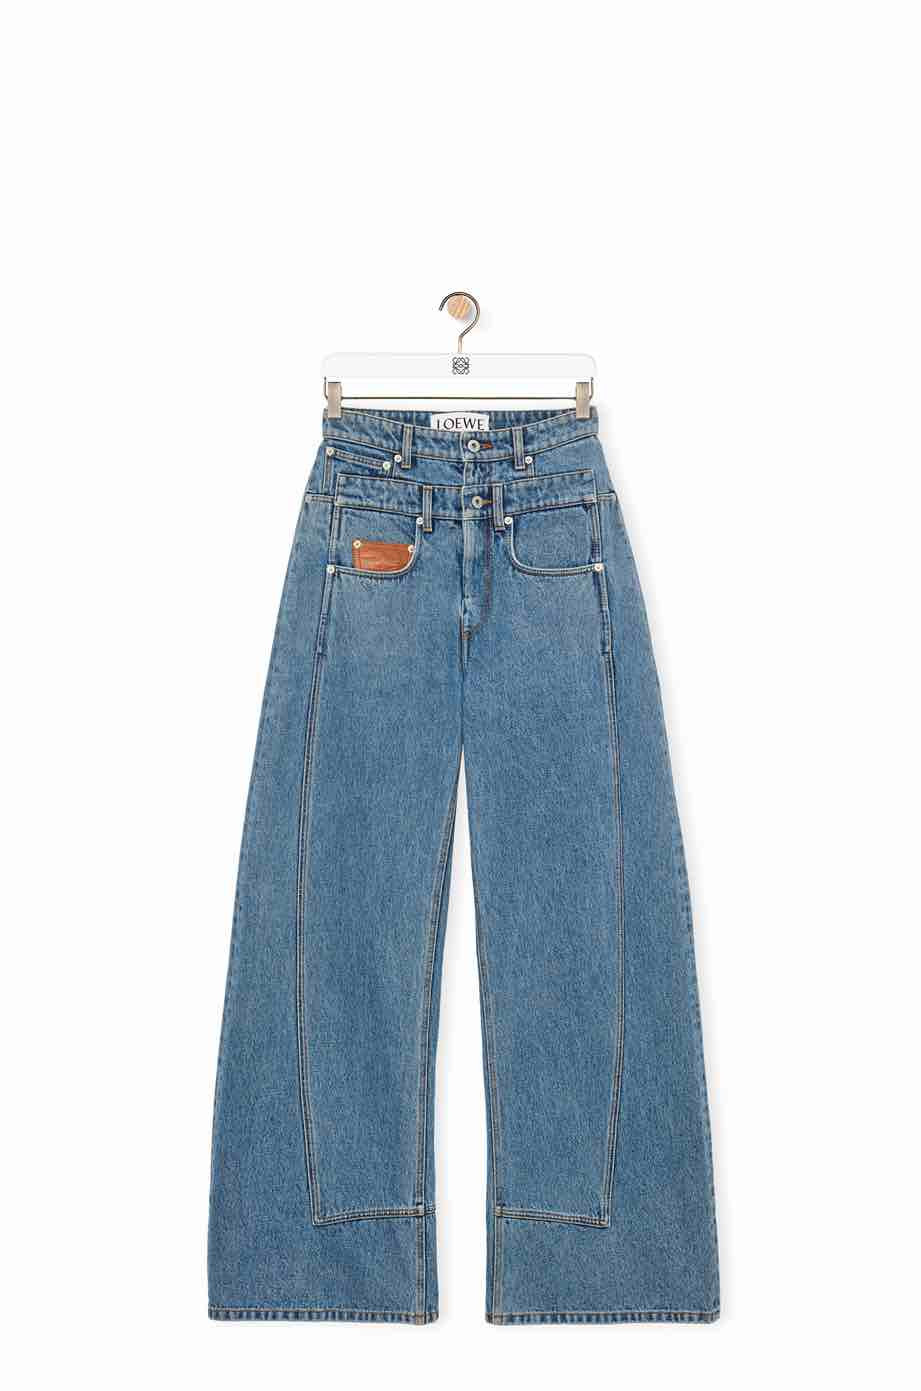 Jeans, Loewe, Rs. 99000 approx